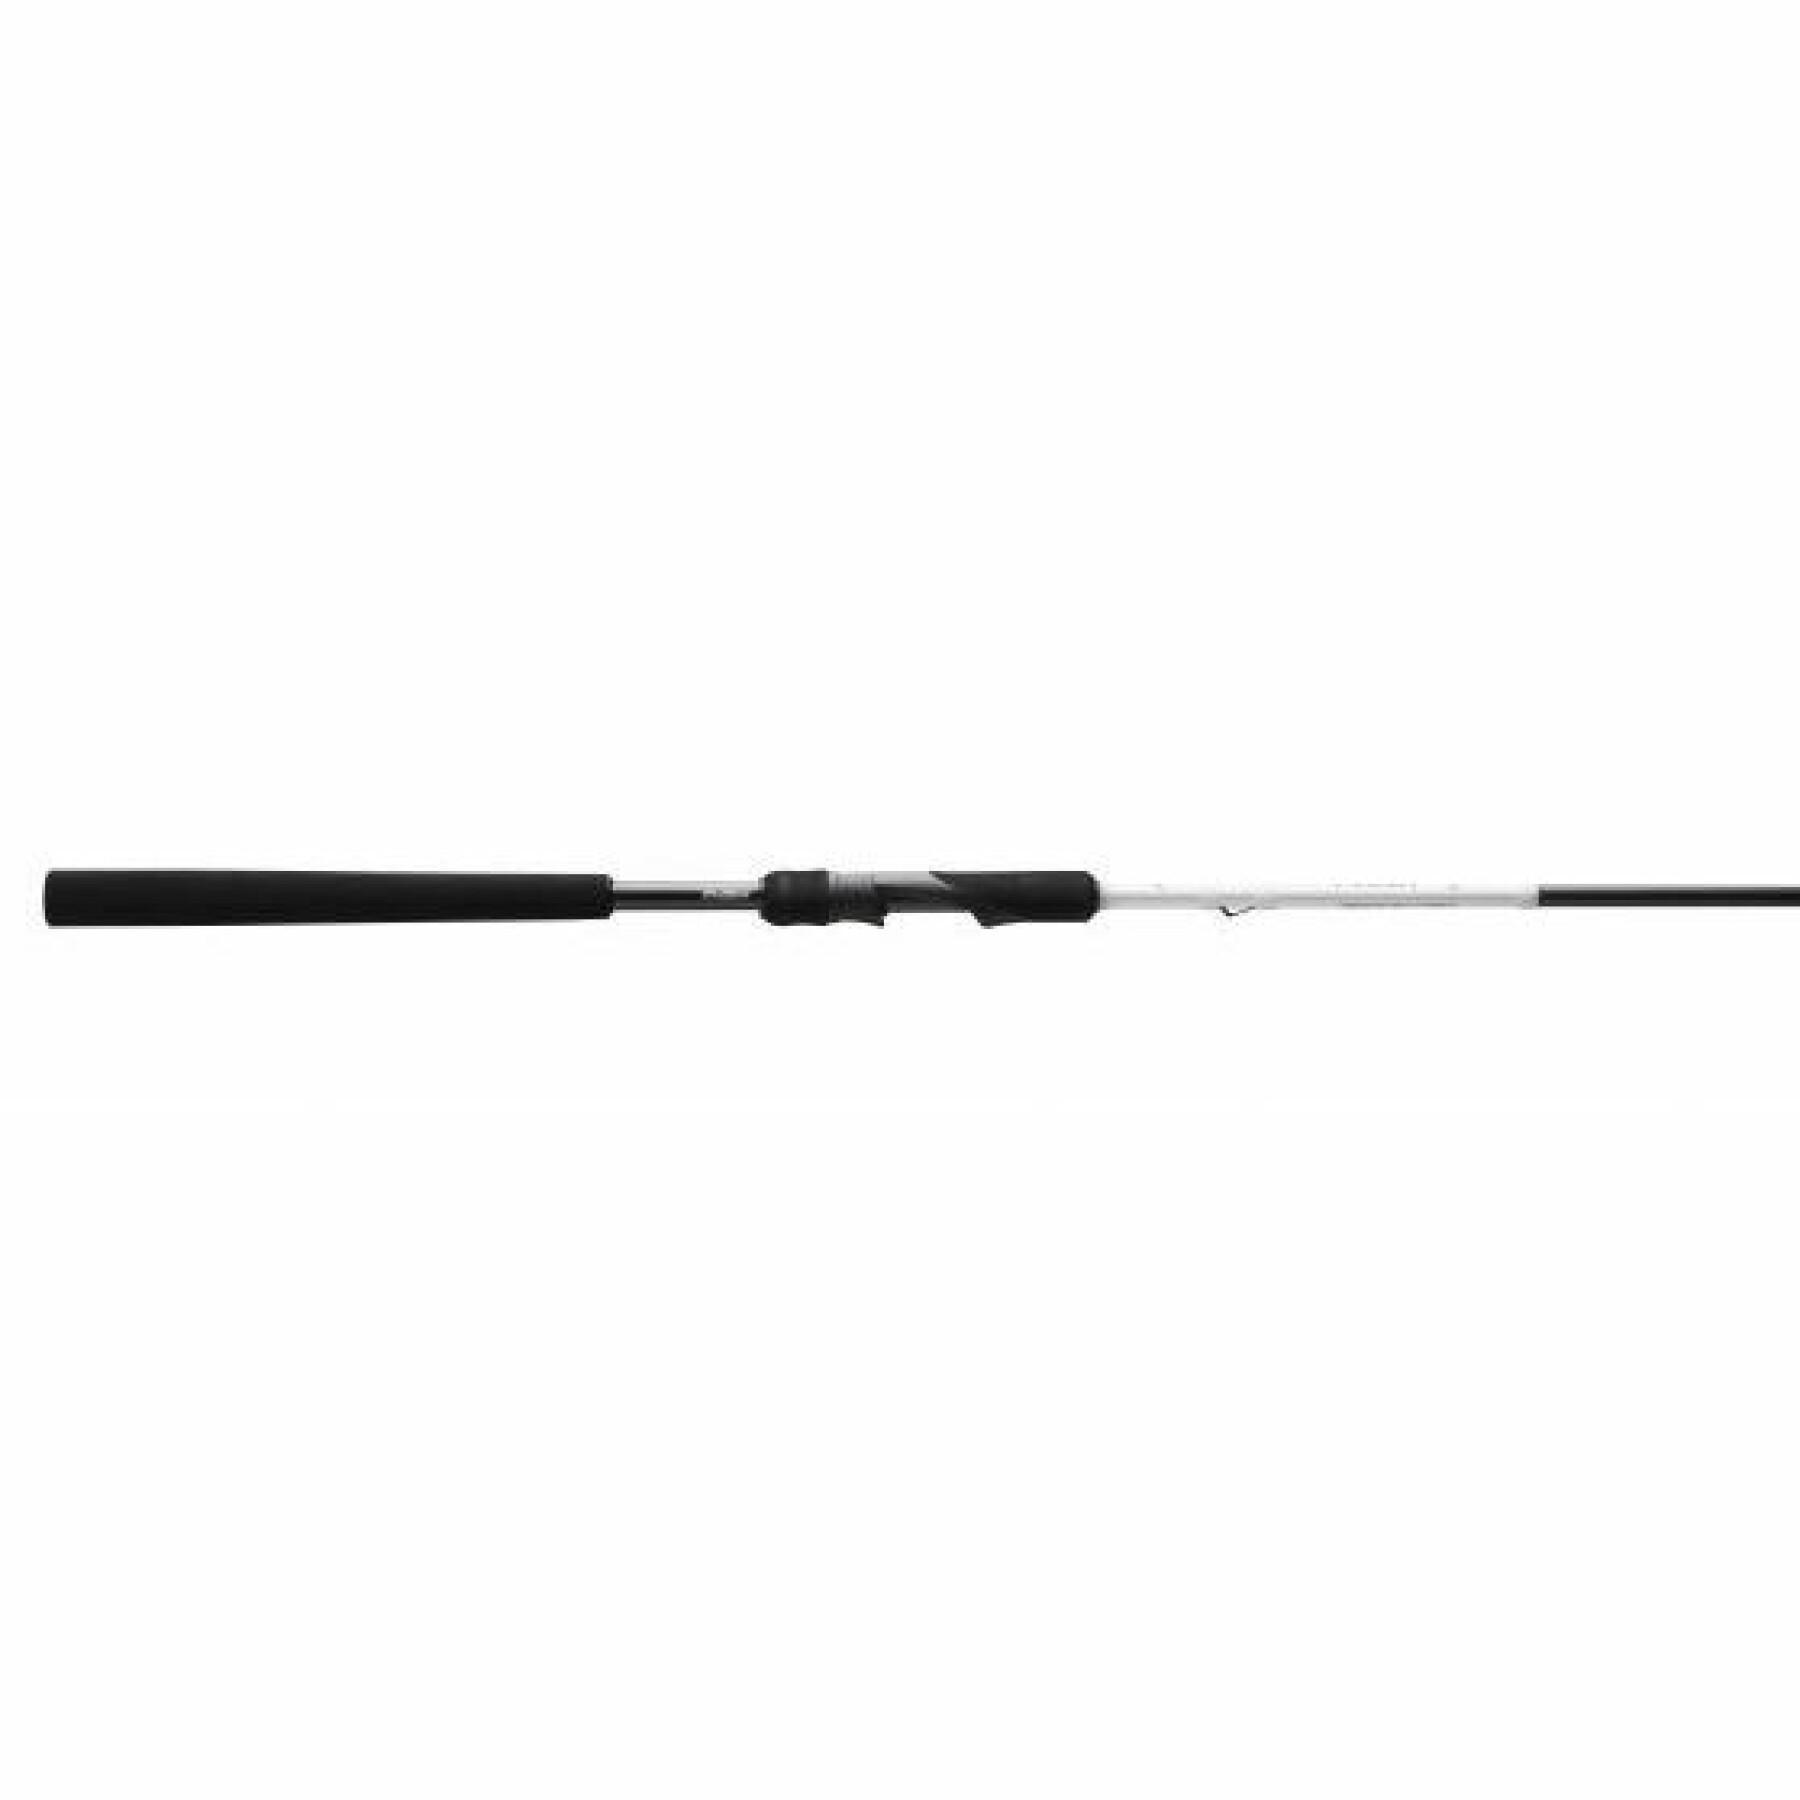 Cana 13 Fishing Rely S Spin 2,18m 20-80g